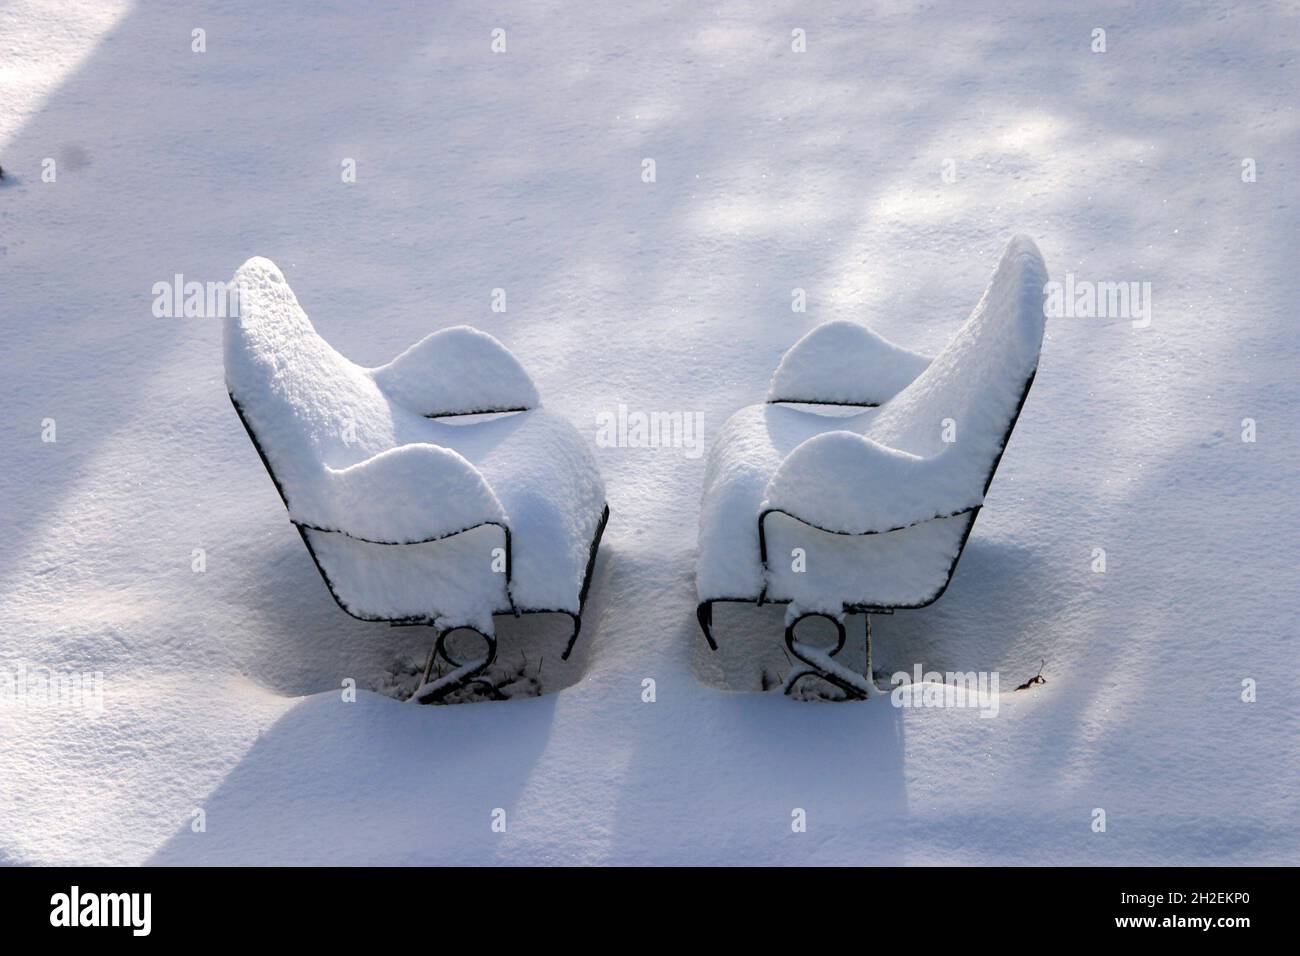 Two lonely deck chairs heavily covered in snow face each other companionably as they wait out the winter Stock Photo